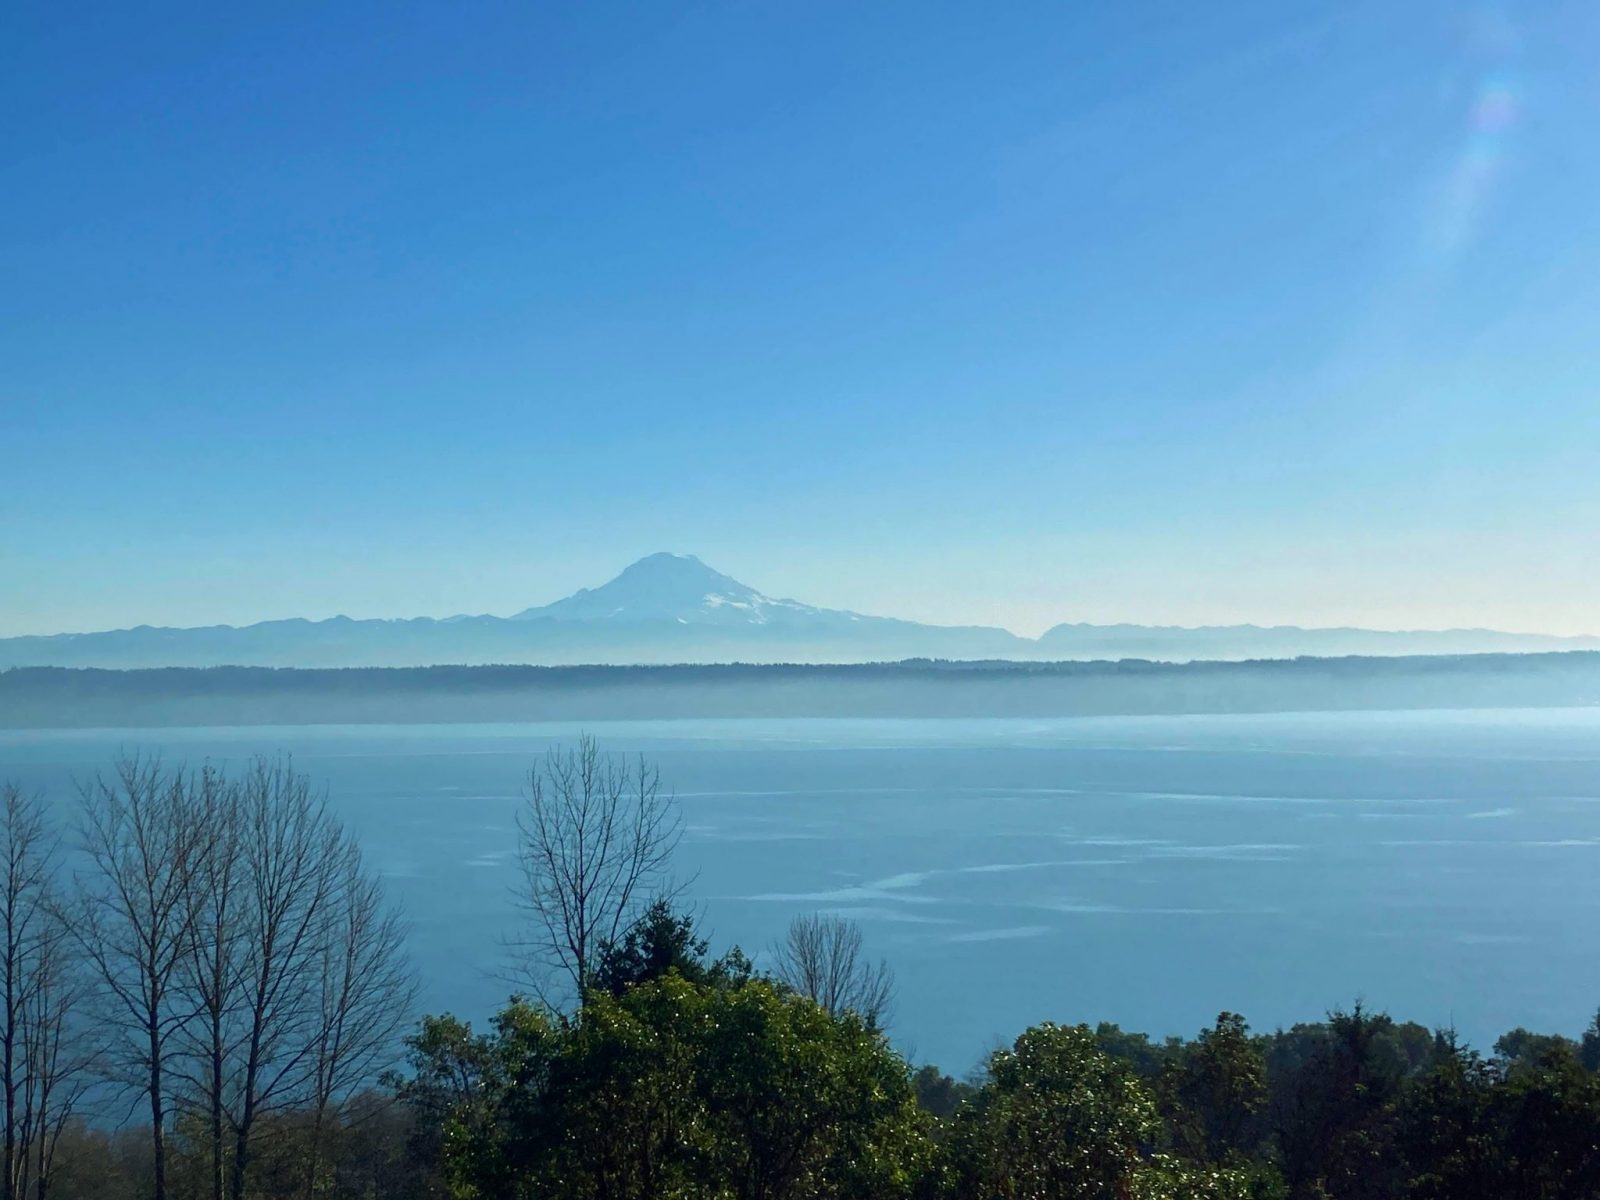 Mt Rainier in the distance across the water on a sunny day. In the foreground are trees from one the Vashon Island hiking trails